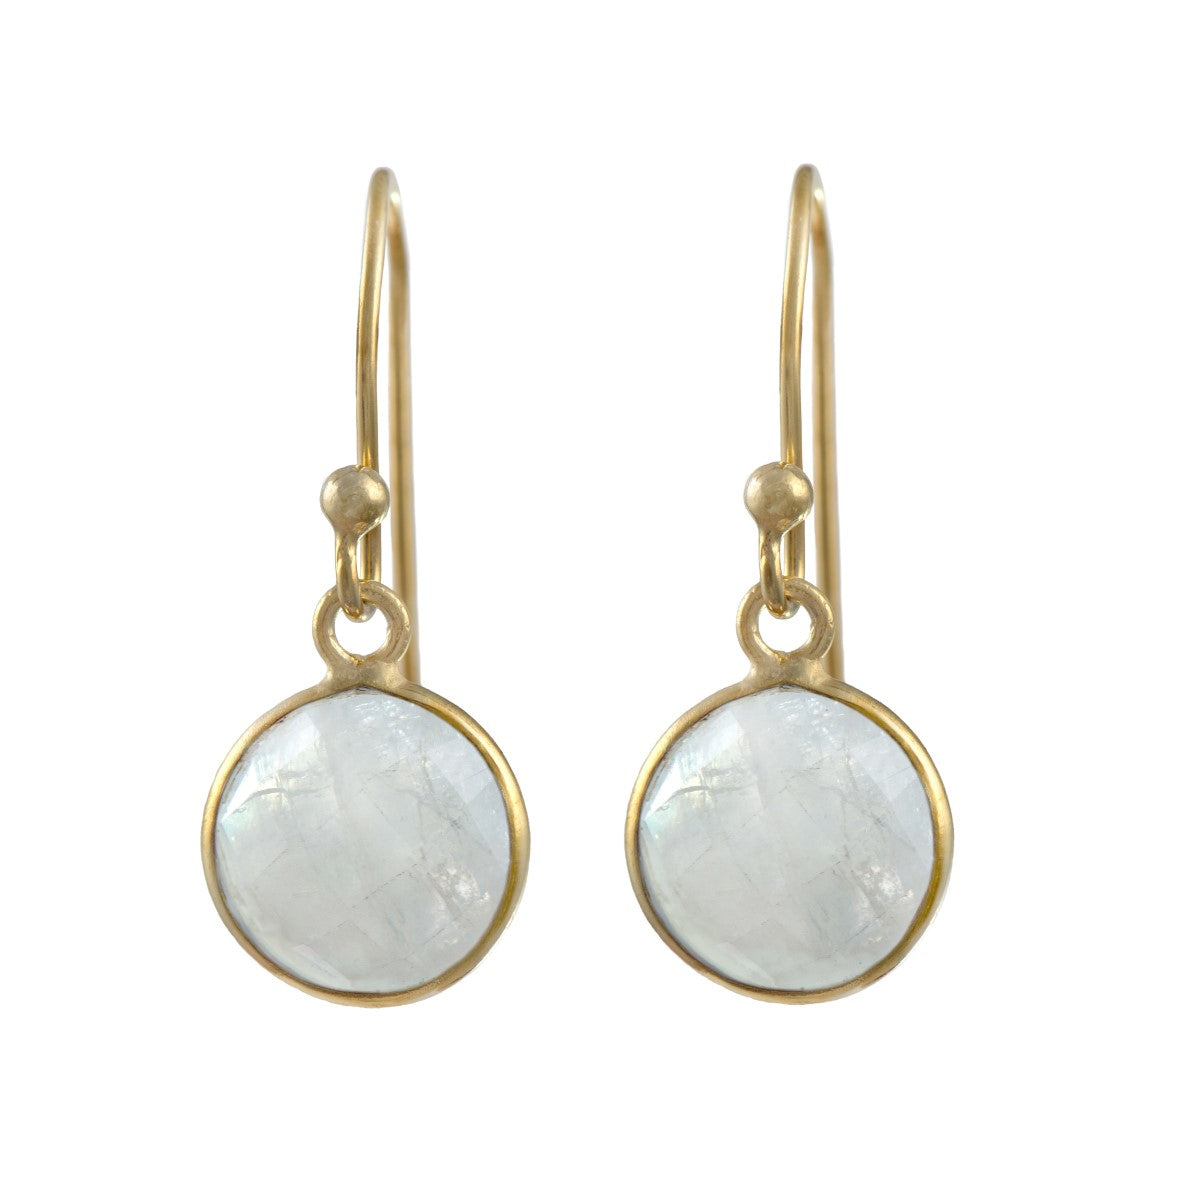 Moonstone Gold Plated Sterling Silver Earrings with a Round Faceted Gemstone Drop